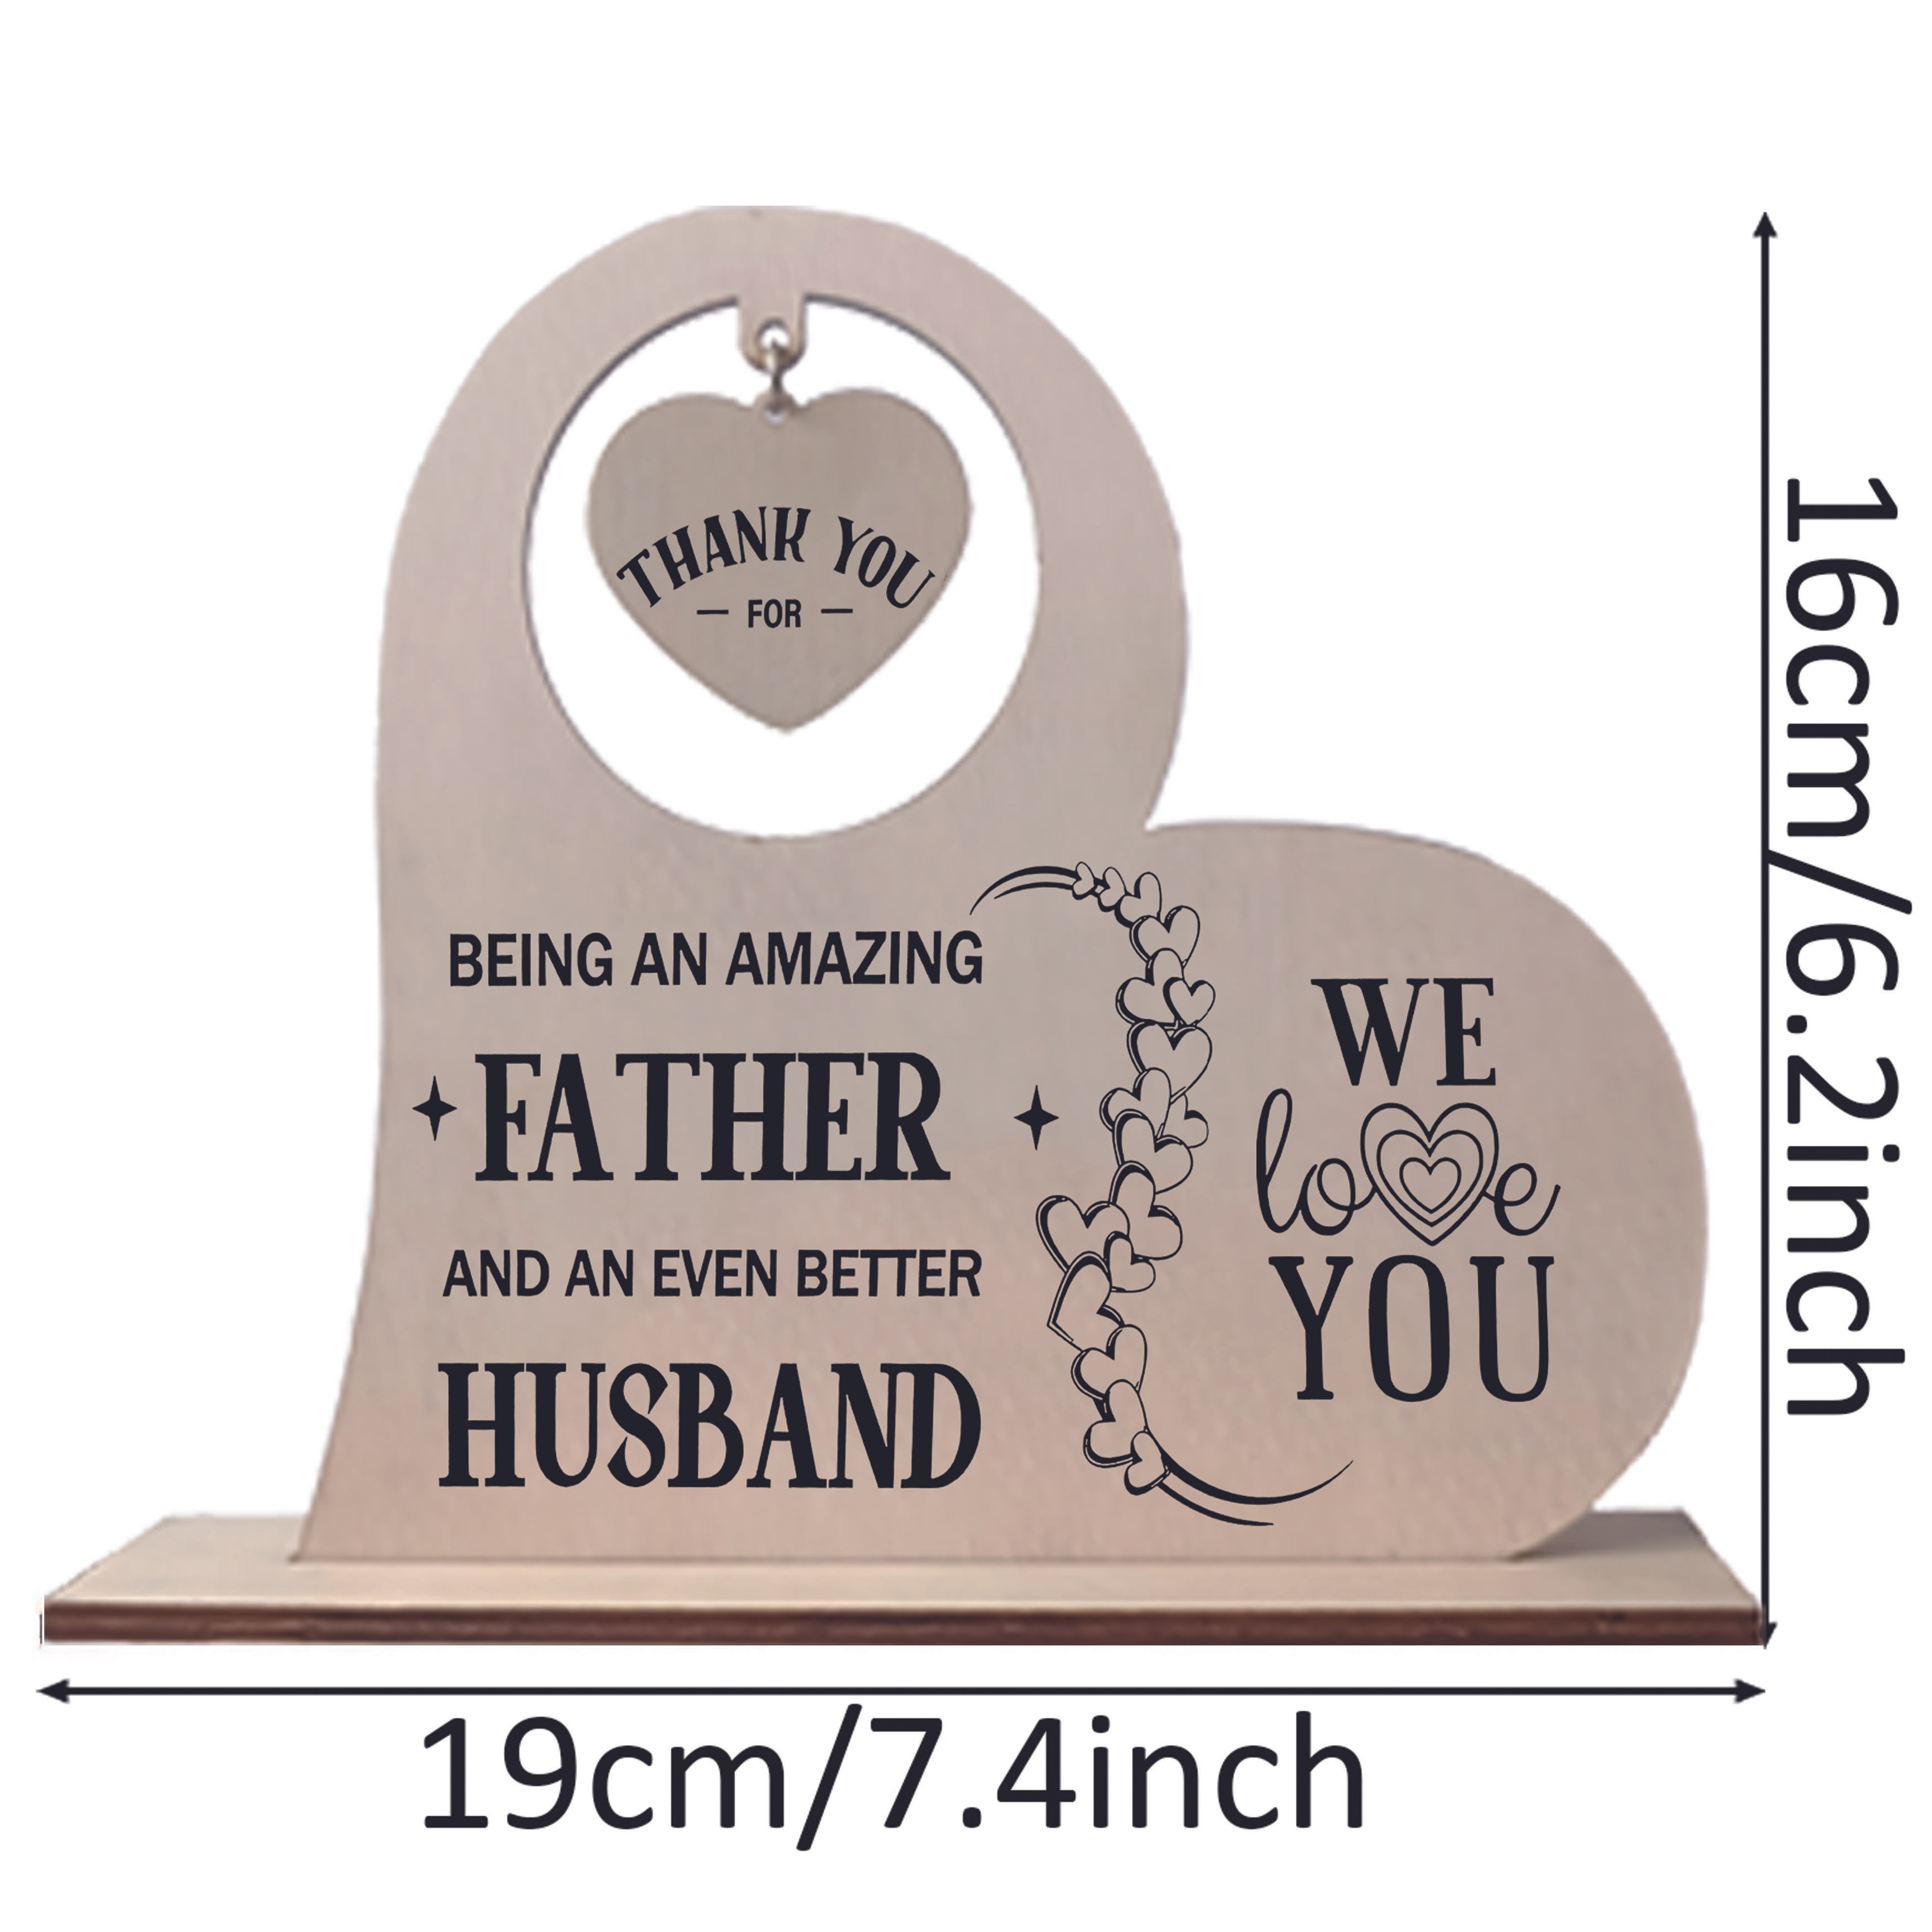 Gifts for Husband - Husband Gifts from Wife - I Love You Gifts for Him for  Anniversary, Husband Birthday Gift, Husband Christmas Gifts - Husband Wood